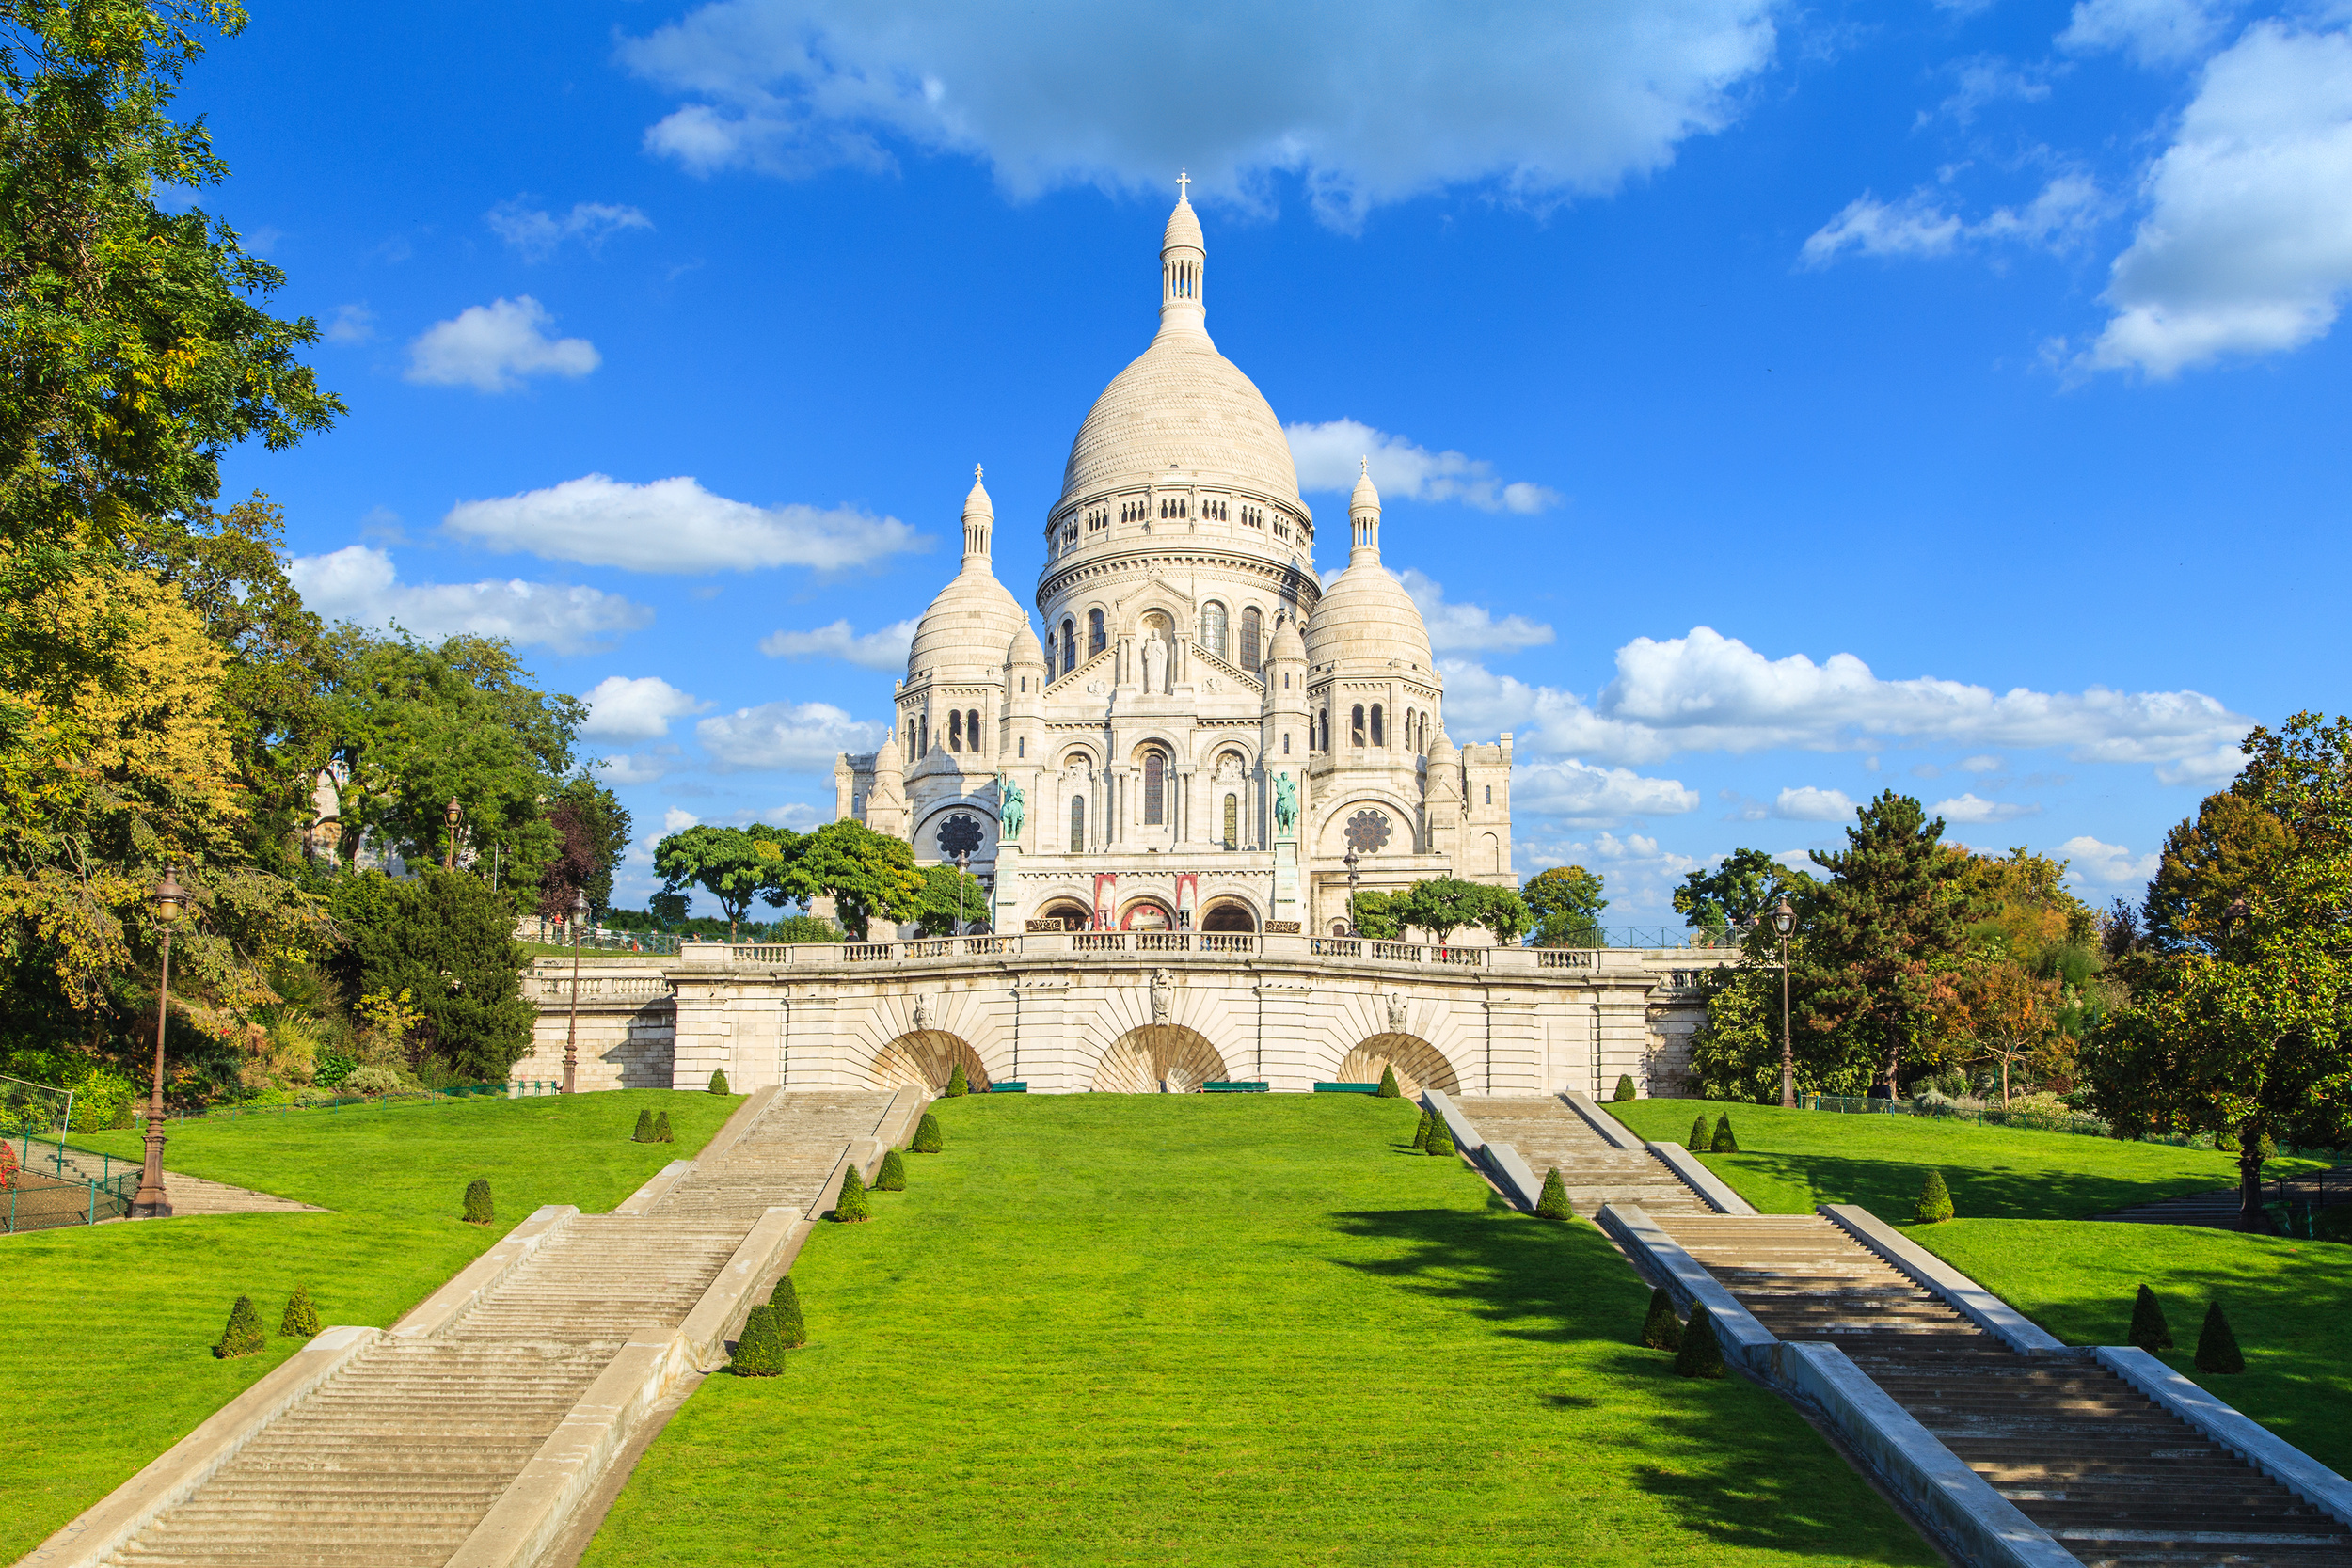 <p>The Sacre-Coeur (sacred heart) basilica is located in the 18th arrondissement, often referred to as Montmartre. After a morning of strolling the picturesque neighborhood, take in this impressive site and enjoy views all over Paris. It’s also a fantastic sunset location.</p><p><a href='https://www.msn.com/en-us/community/channel/vid-cj9pqbr0vn9in2b6ddcd8sfgpfq6x6utp44fssrv6mc2gtybw0us'>Follow us on MSN to see more of our exclusive lifestyle content.</a></p>